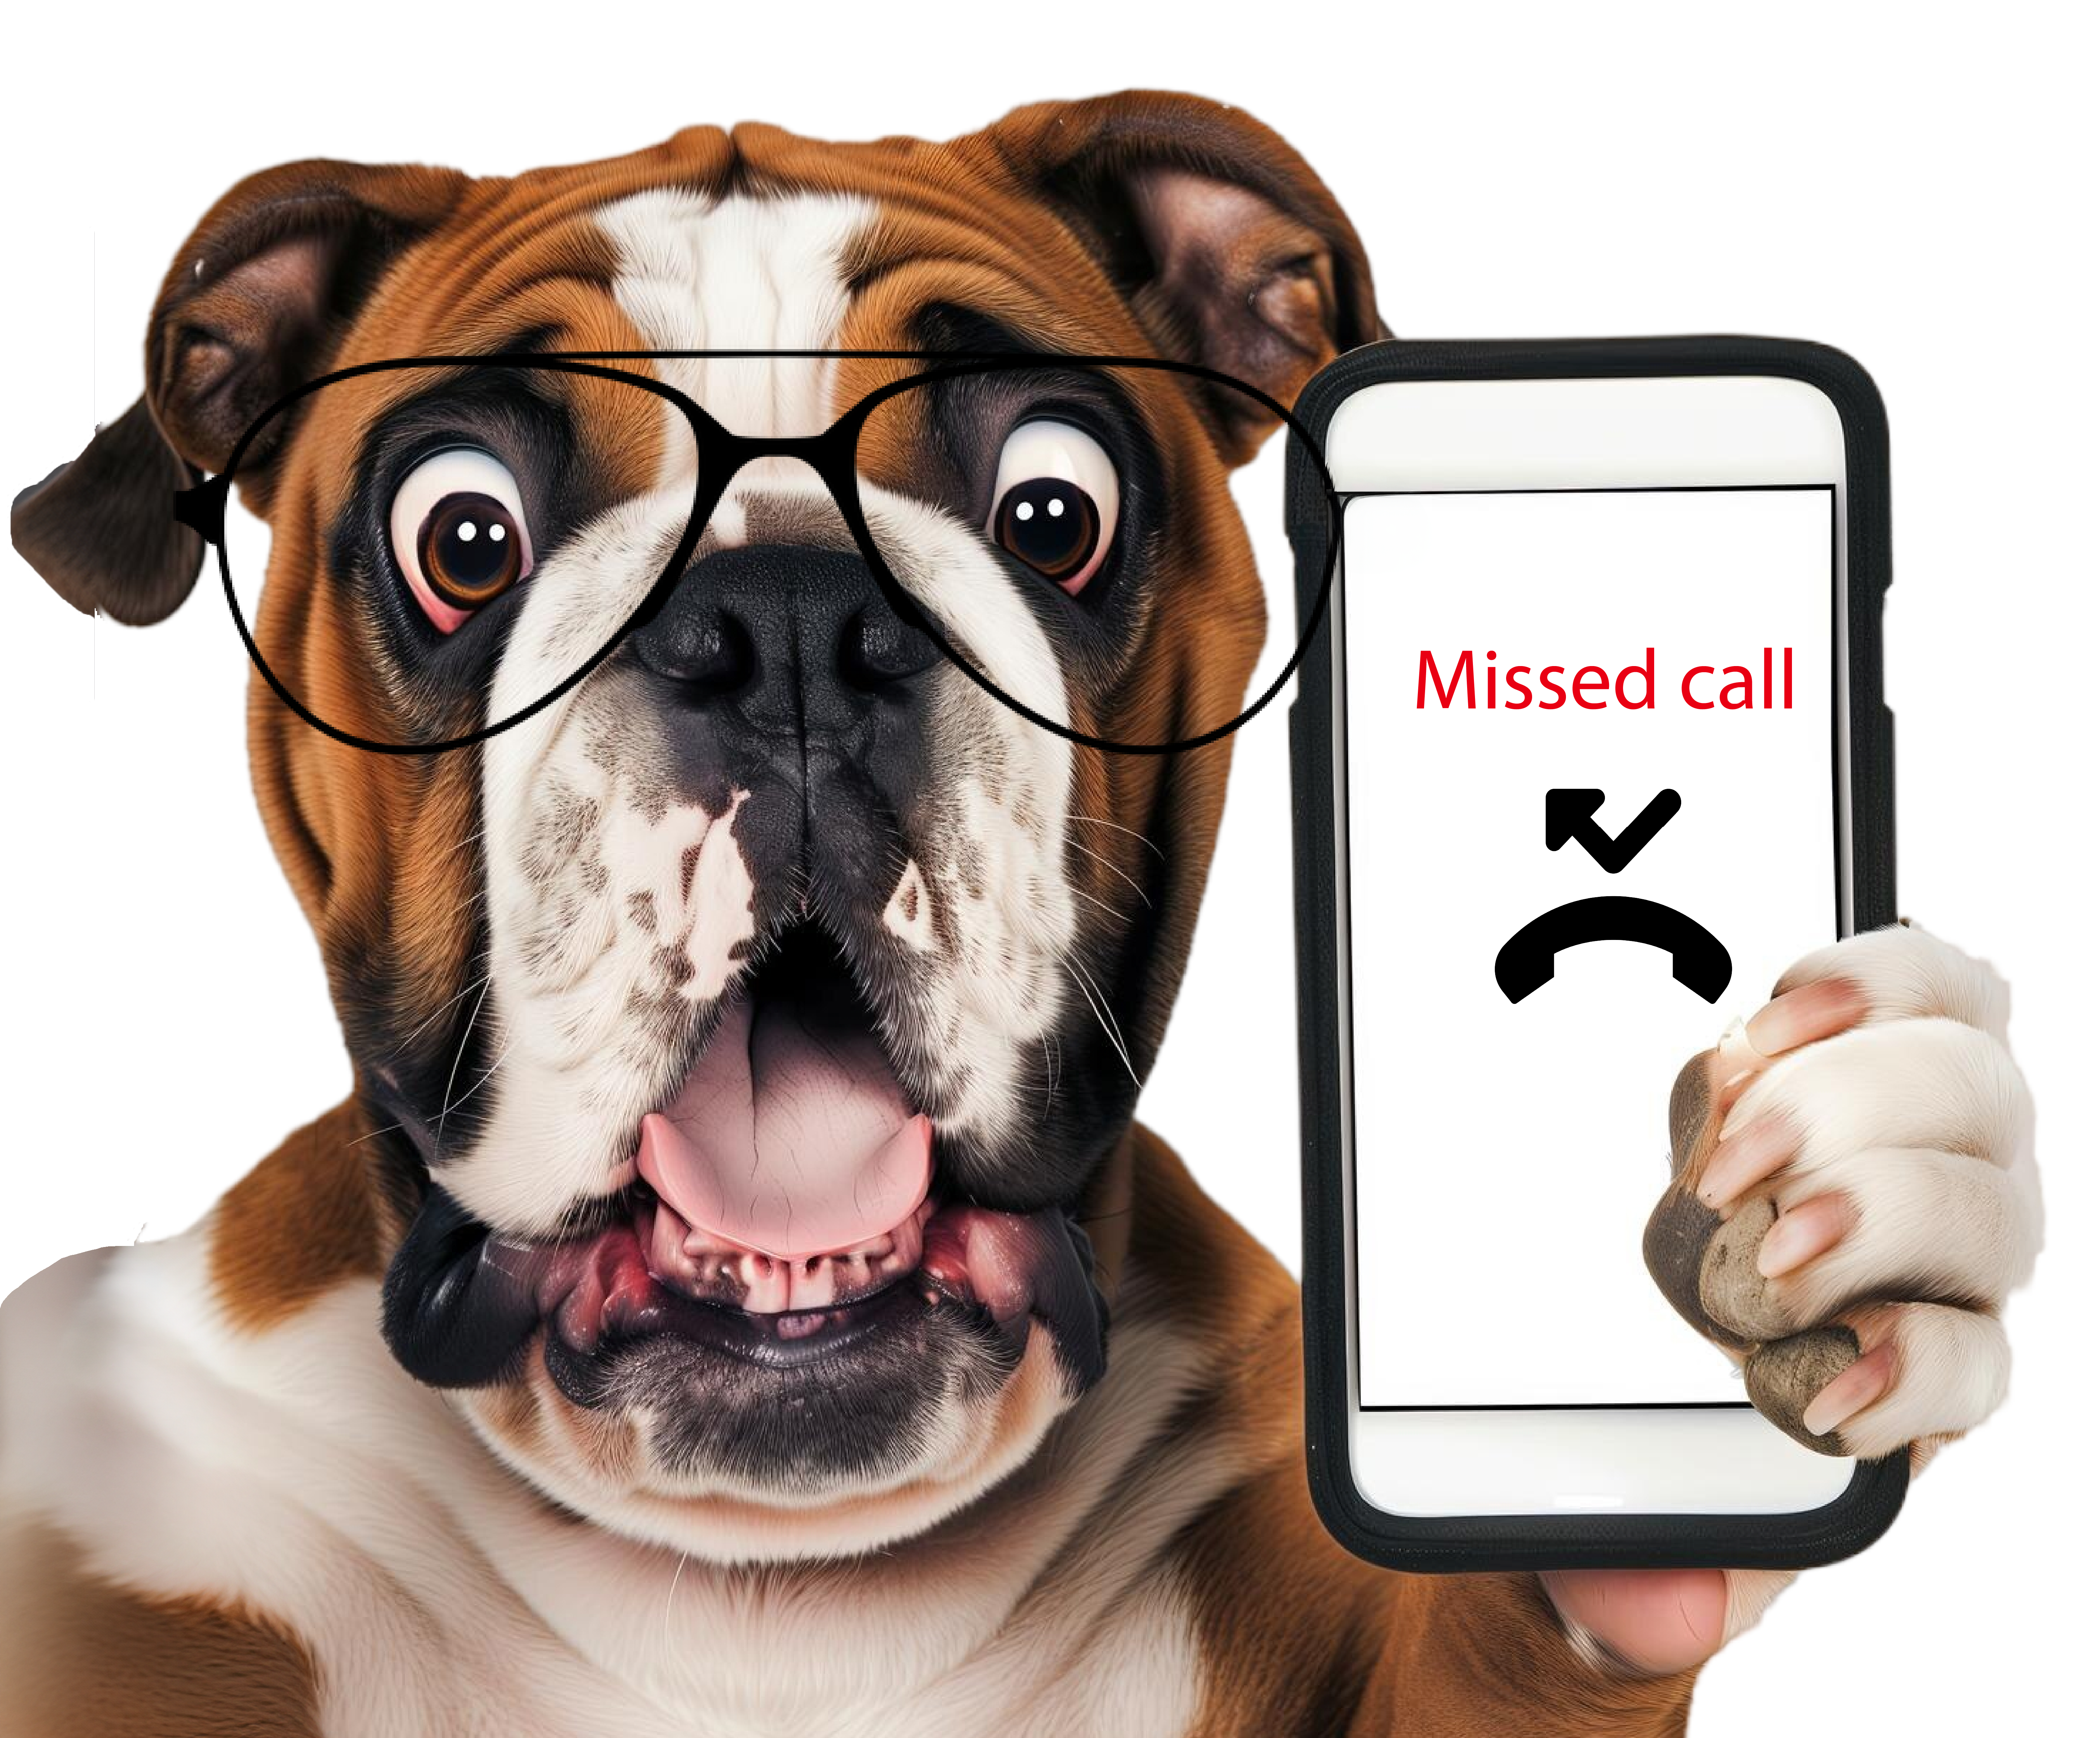 Dog holding a phone which is showing a missed call.